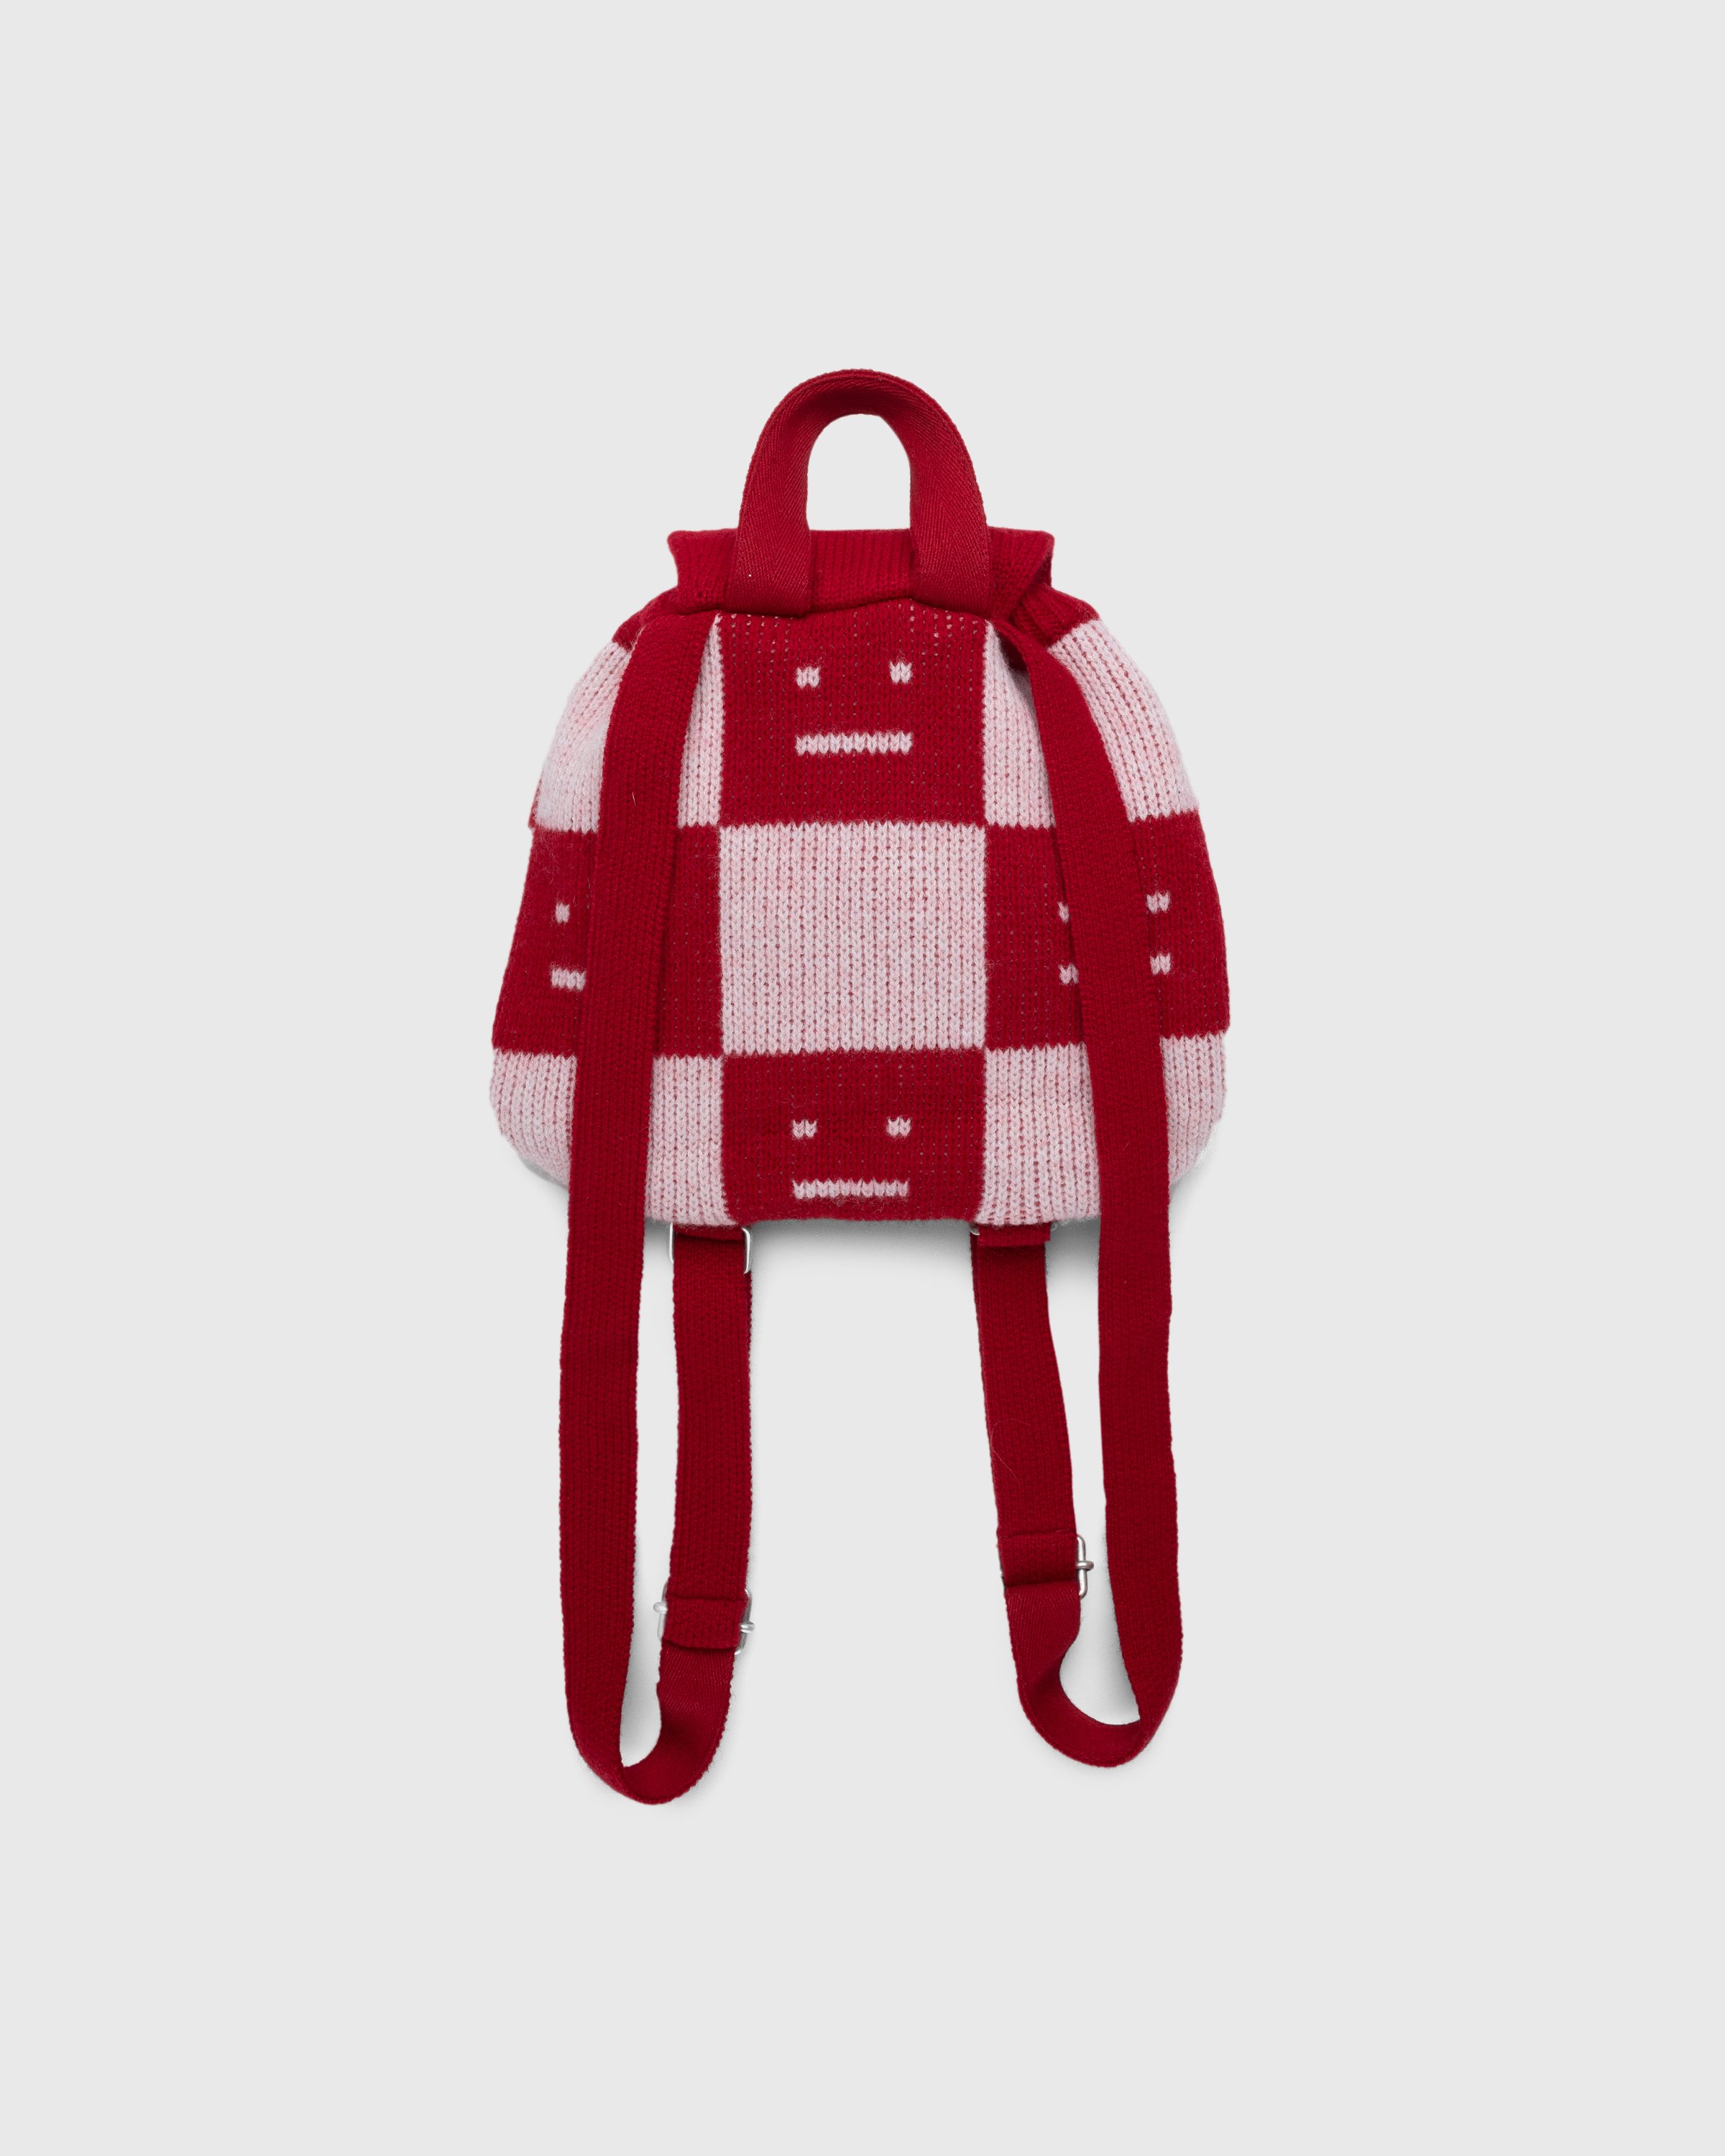 Acne Studios - Knit Face Backpack Deep Red/Faded Pink/Melange - Accessories - Red - Image 2